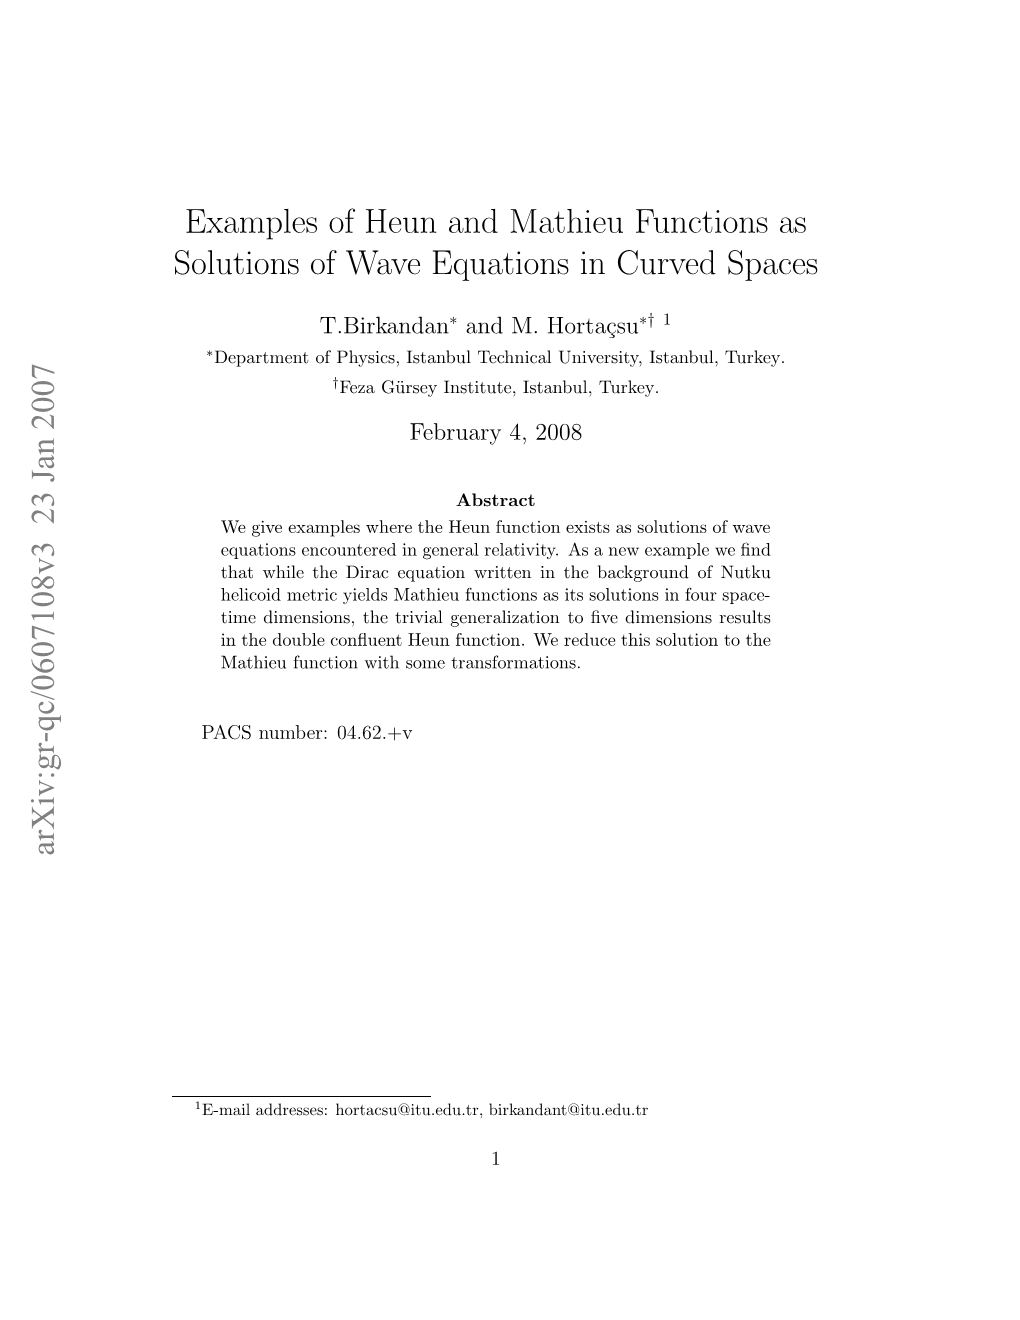 Examples of Heun and Mathieu Functions As Solutions of Wave